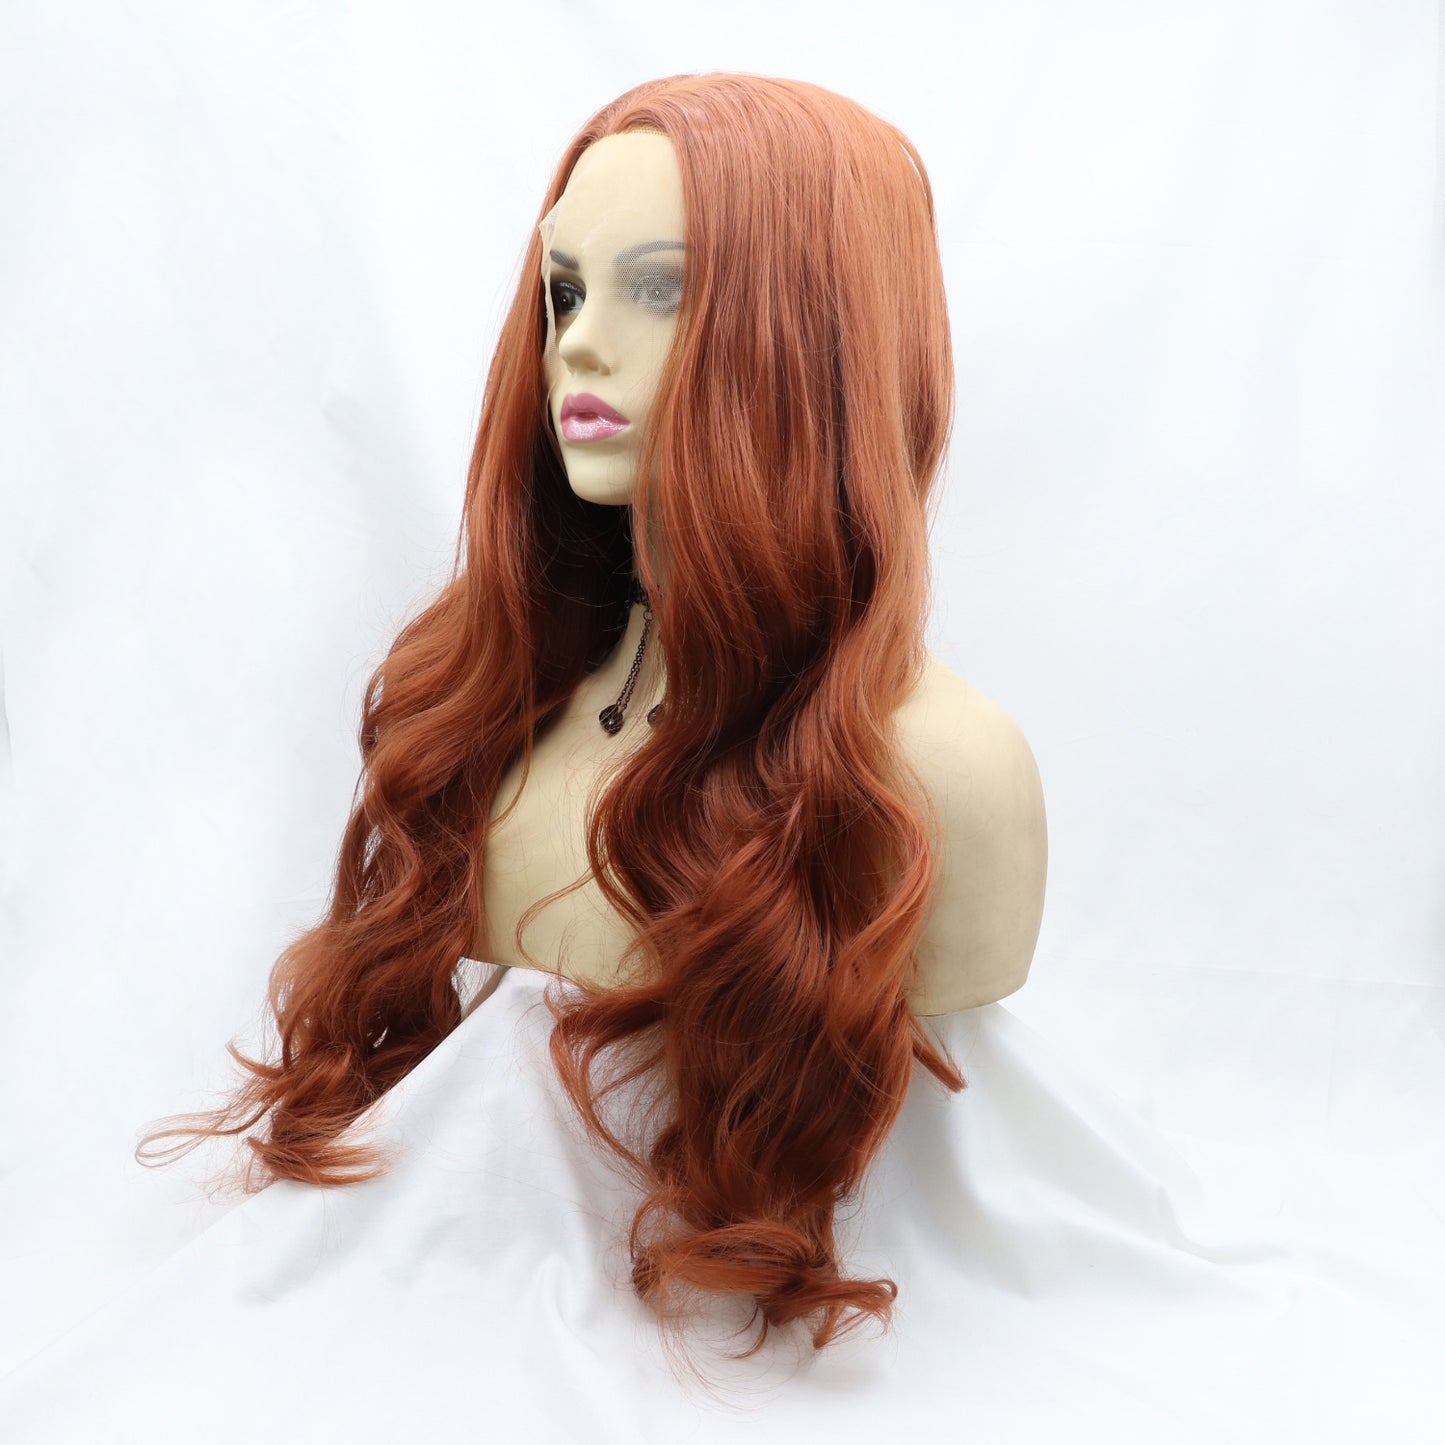 Ivy 13 x 3" Lace Front Wigs Synthetic Long Wavy 24" 130% Density